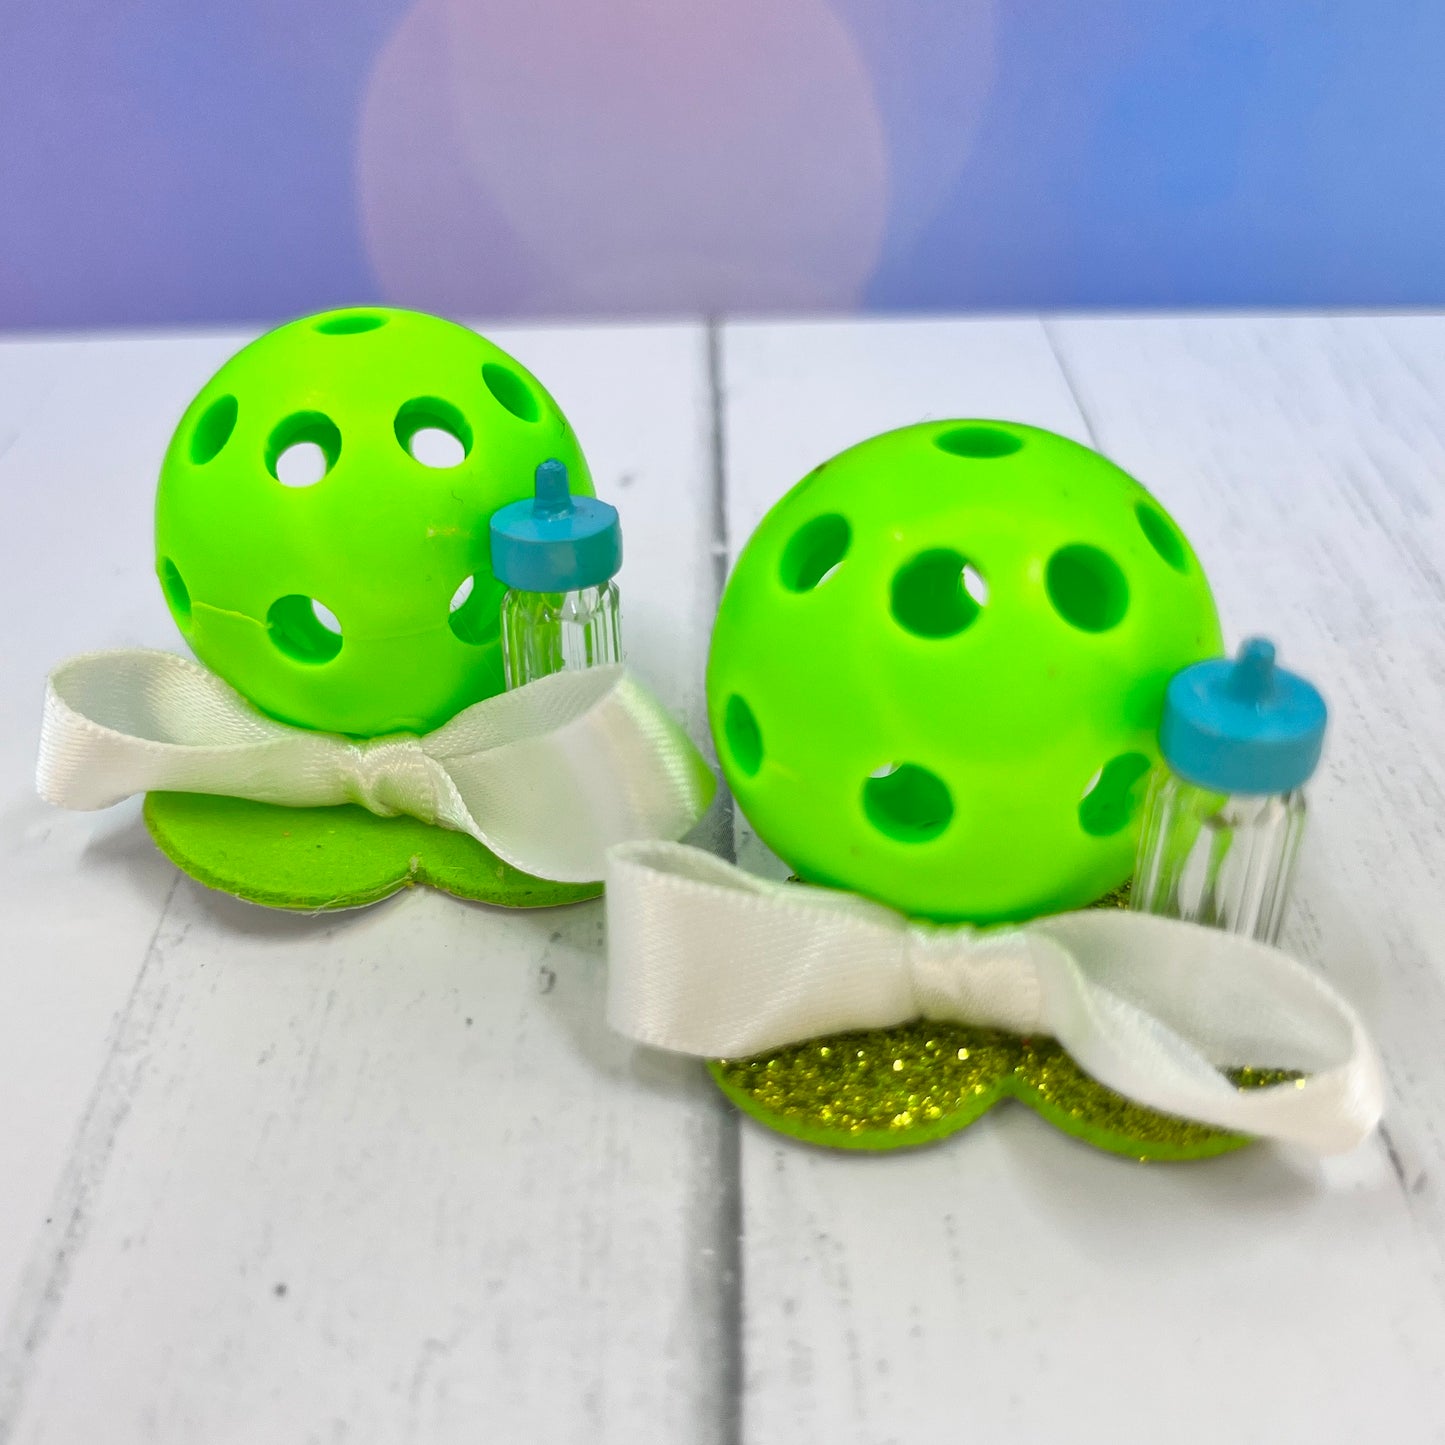 Pickleball Ball Ornaments - Set of 2 Upcycled Pickleball Ornaments  Pickleball Christmas all year! It’s 2020, so why not? Perfect as a gift for yourself or others. It takes up very little space for all the RV pickleballers out there. This set of 2 upcycled pickleball ornaments can be hung in the doorway or used as a Christmas tree ornament. The pickleballs are adorned with fun tassels and one has a poinsettia and the other has a snowflake.